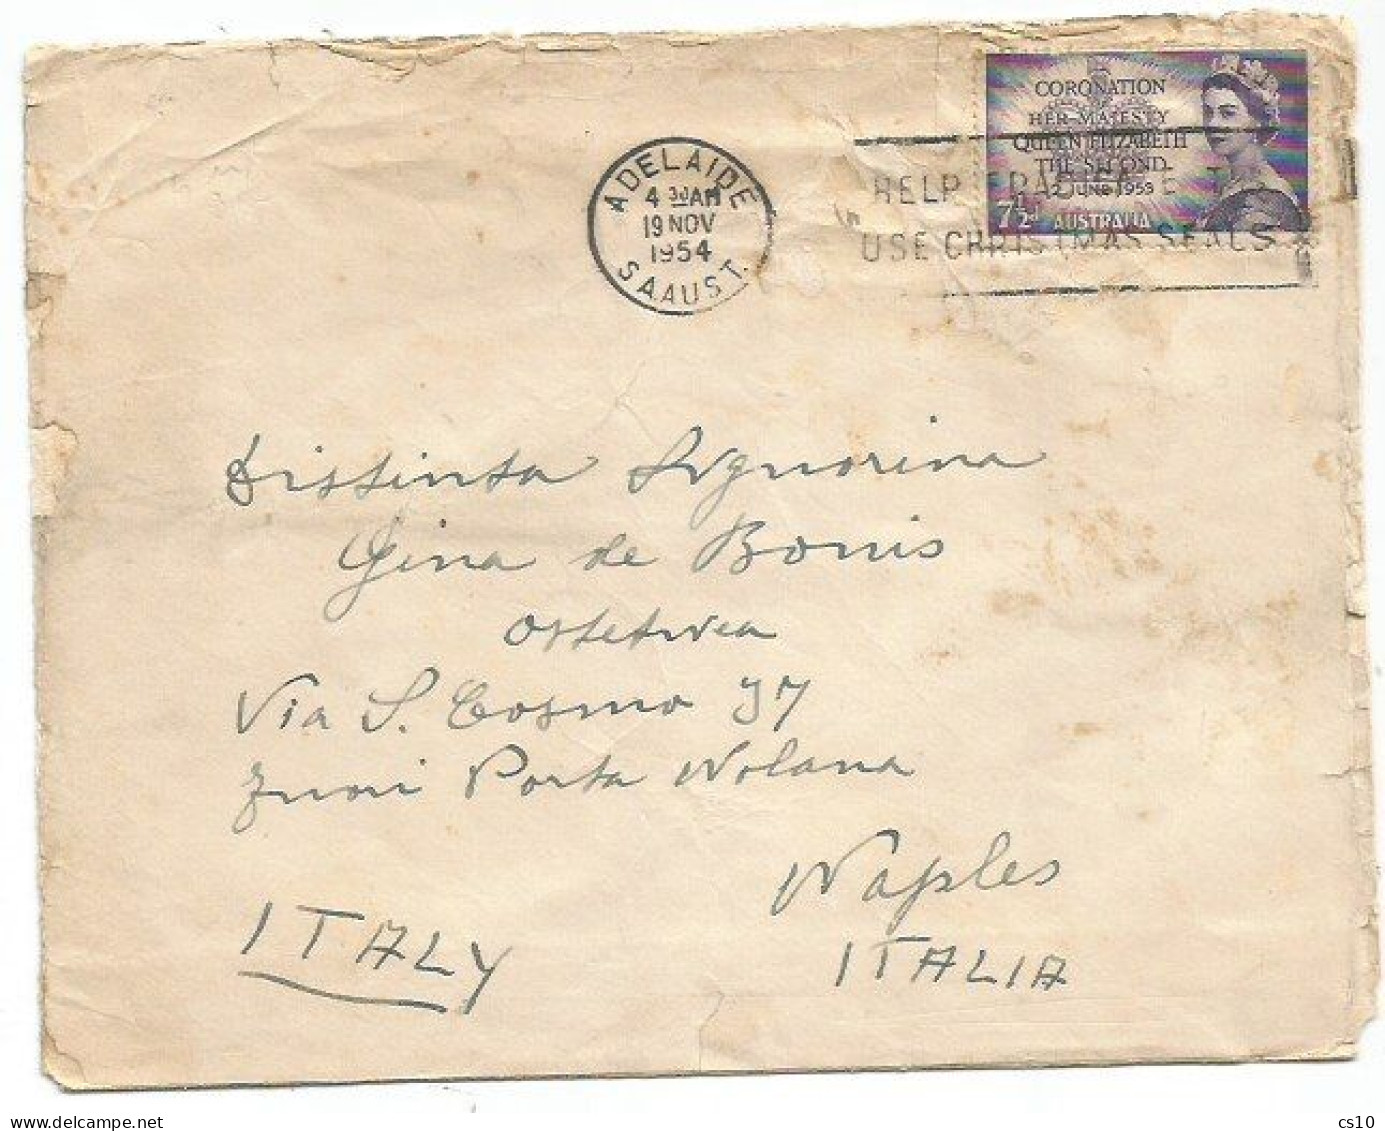 Australia Coronation Day 1953 D.7.1/2 Solo Franking AirmailCV Adelaide 19nov1954 To Italy - Lettres & Documents